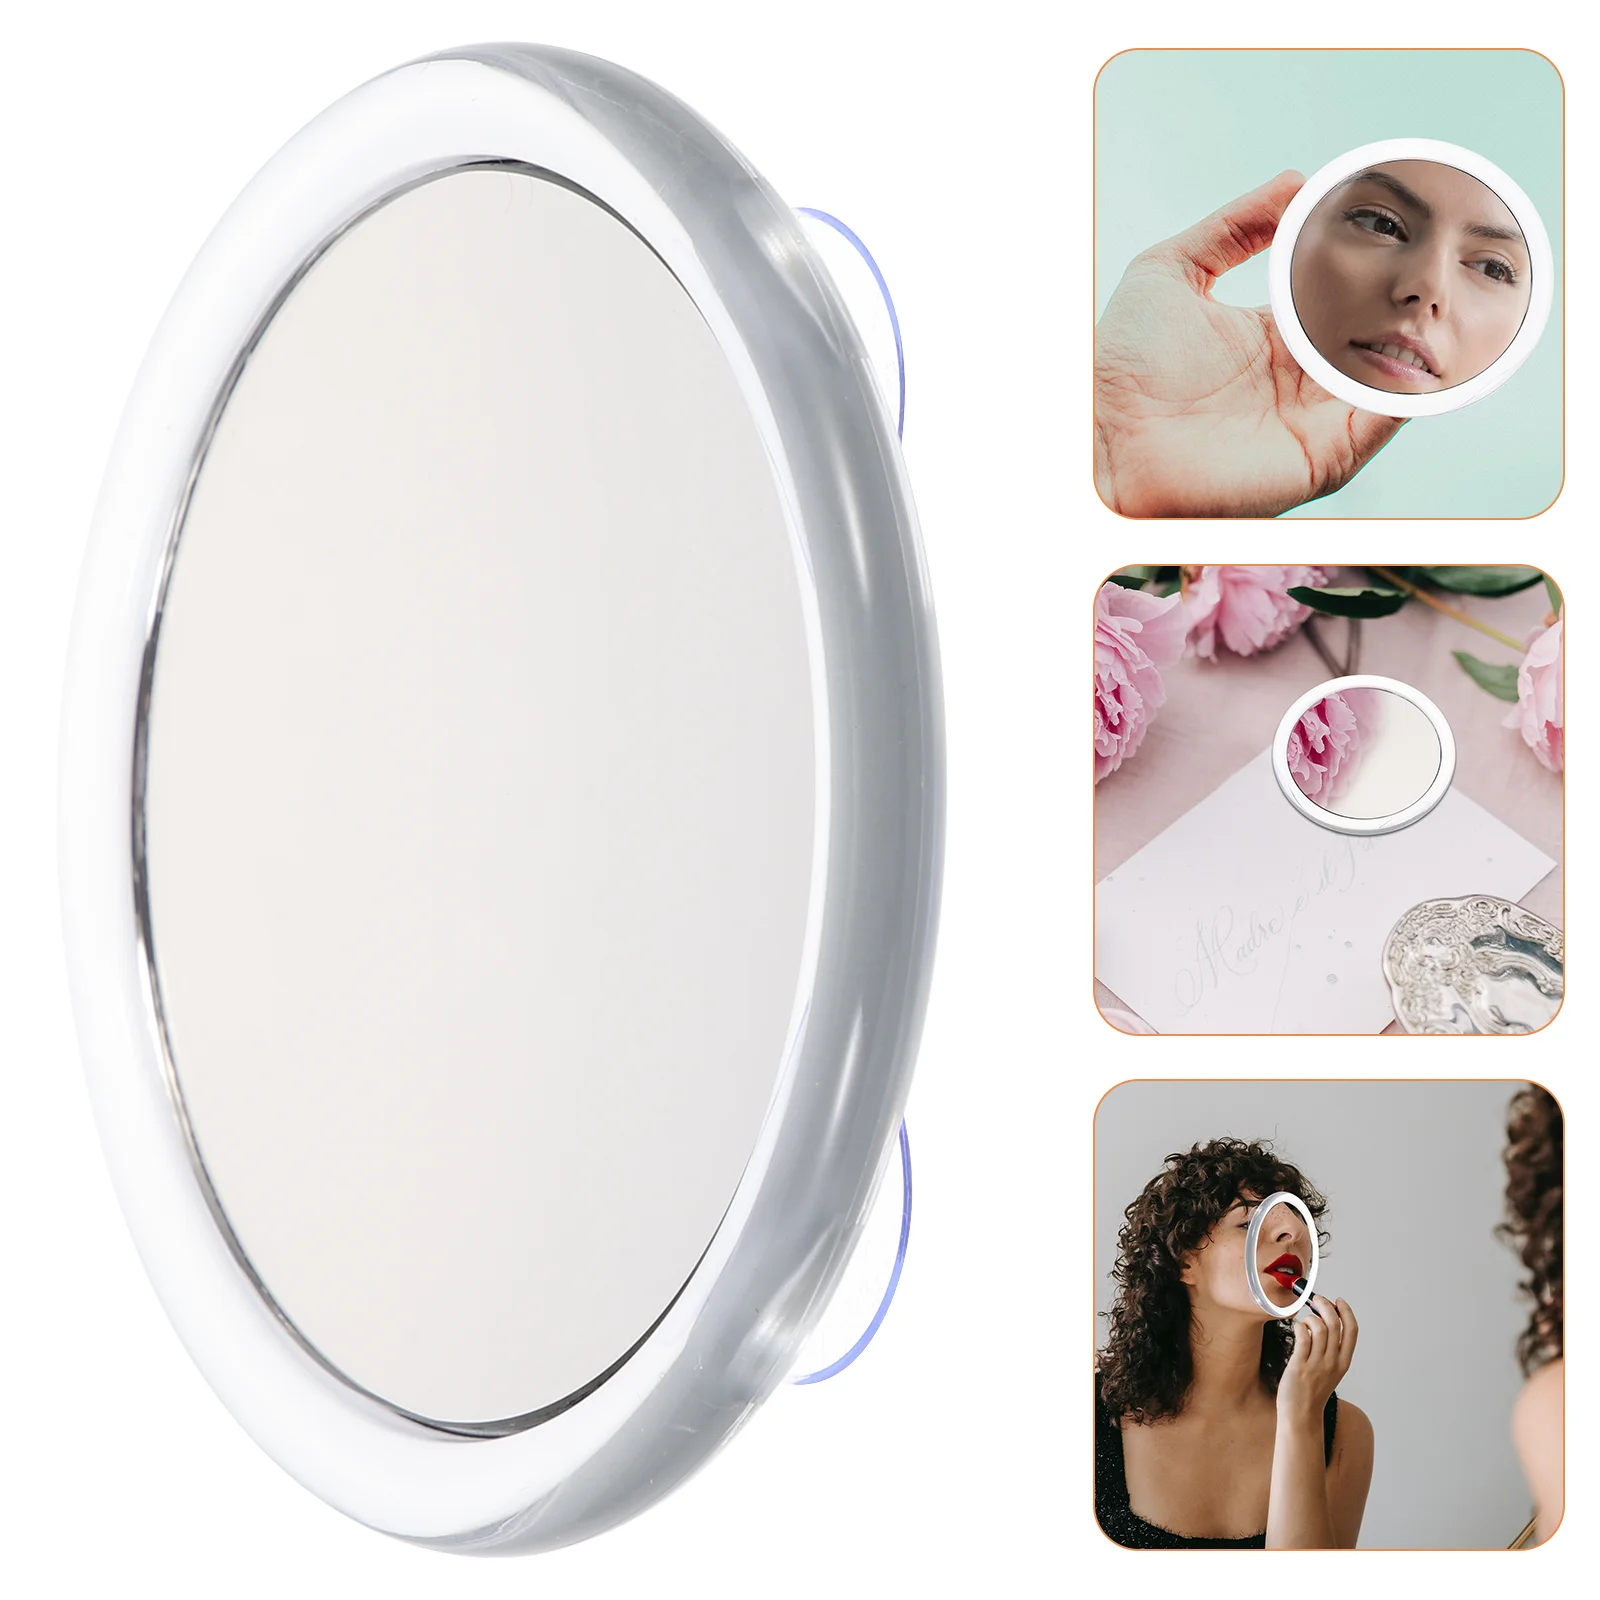 

Suction Cup Vanity Mirror Mini 20X Magnifying Makeup Single Sided Mirrors Glass Bathroom Travel